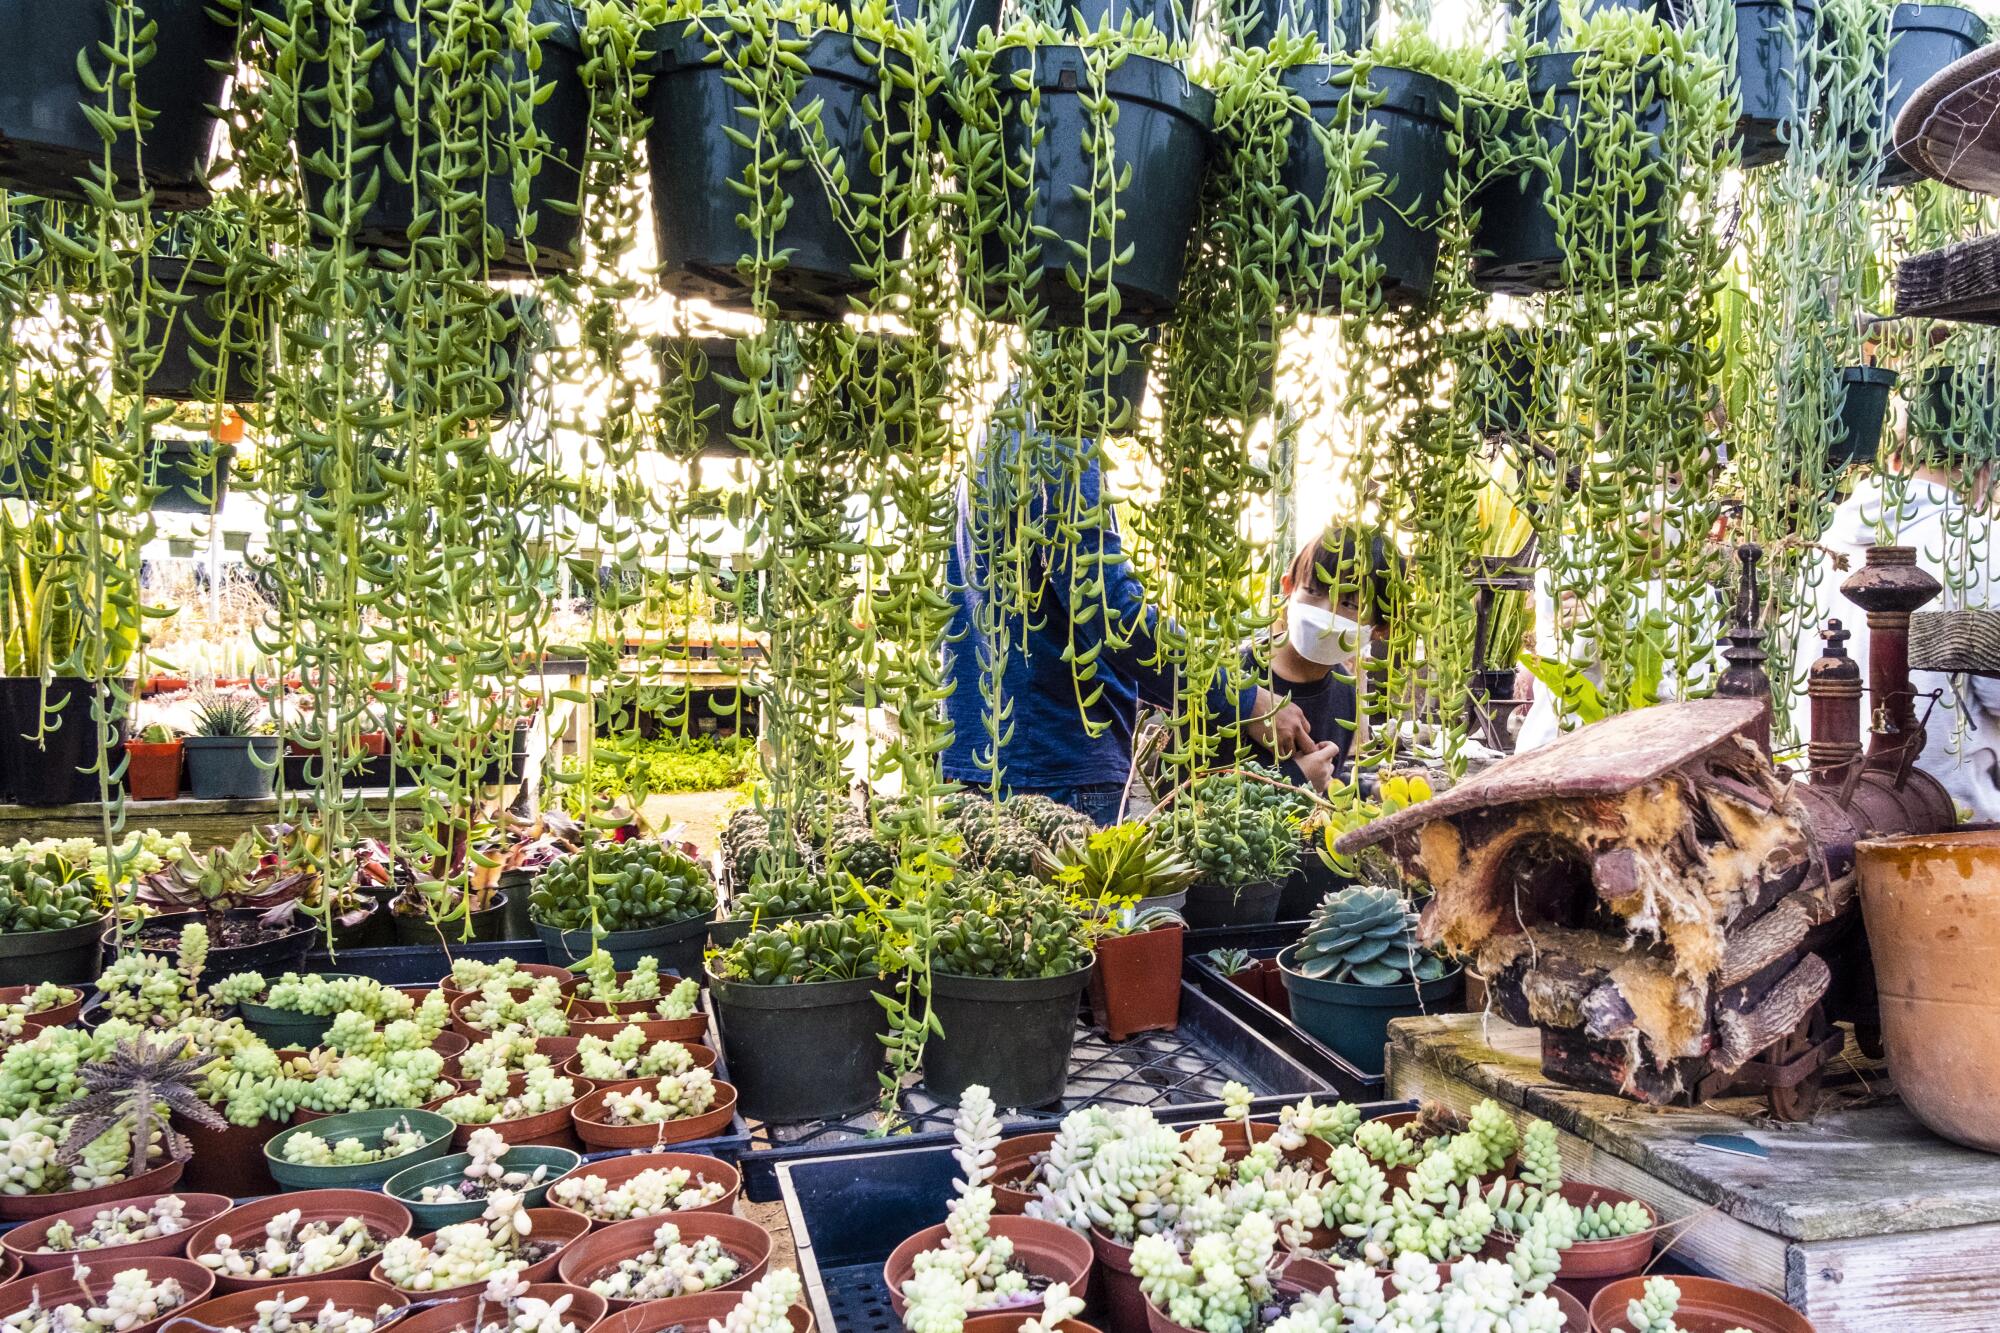 Visitors peruse an area adorned with hanging succulents.